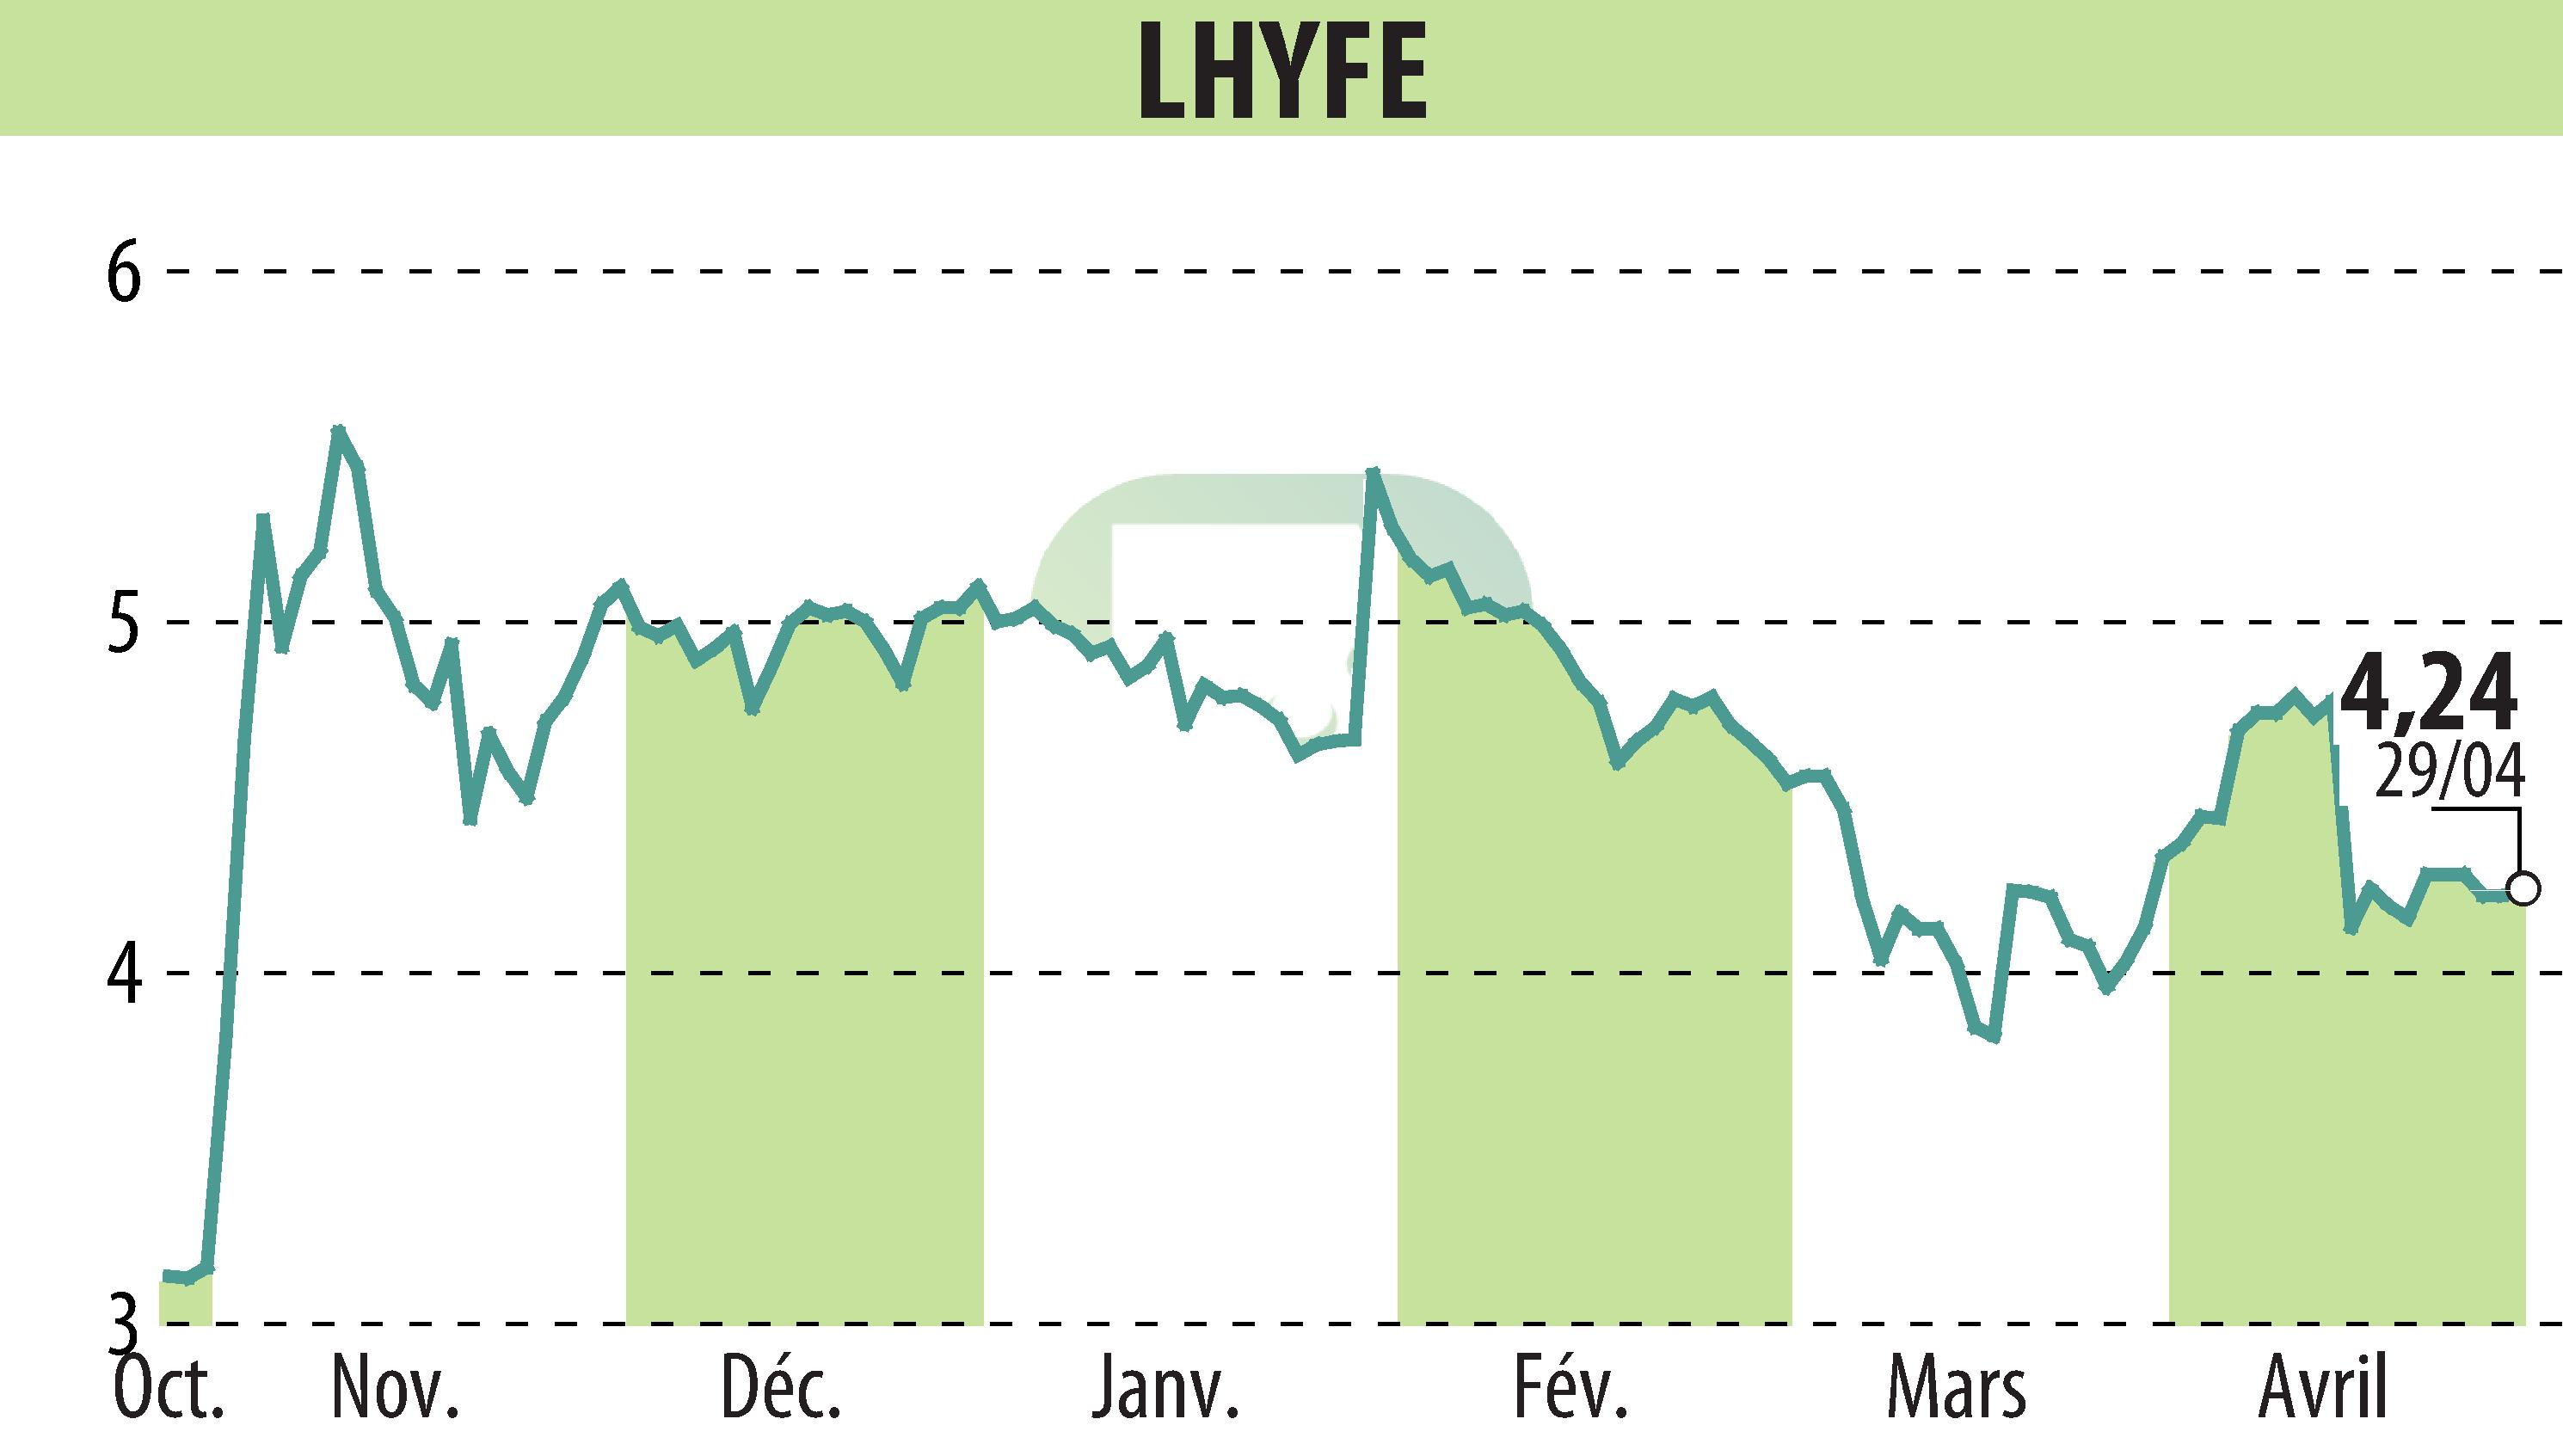 Stock price chart of LHYFE (EPA:LHYFE) showing fluctuations.